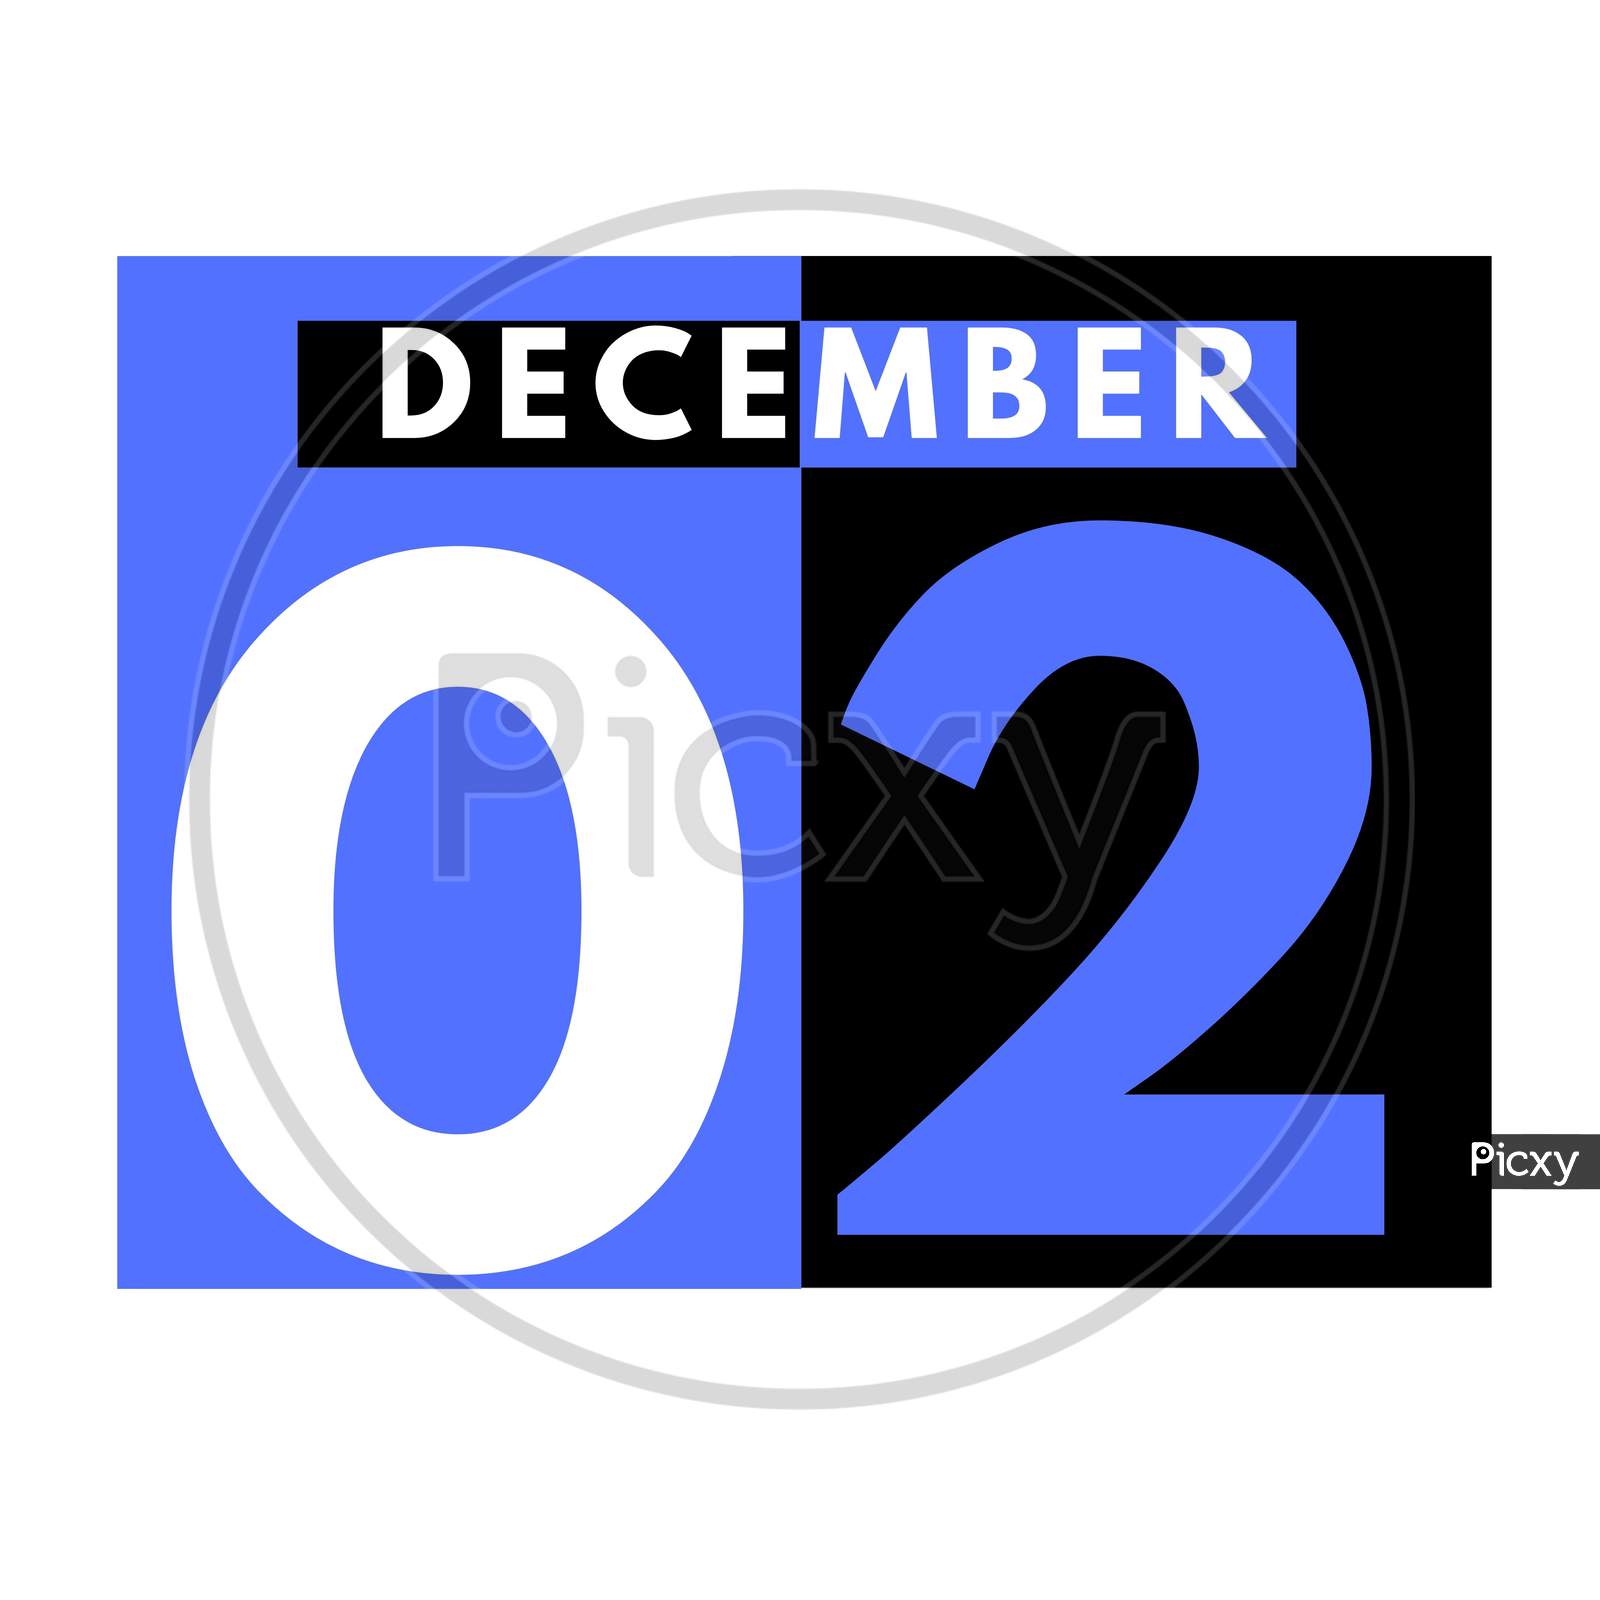 December 2 . Modern Daily Calendar Icon .Date ,Day, Month .Calendar For The Month Of December